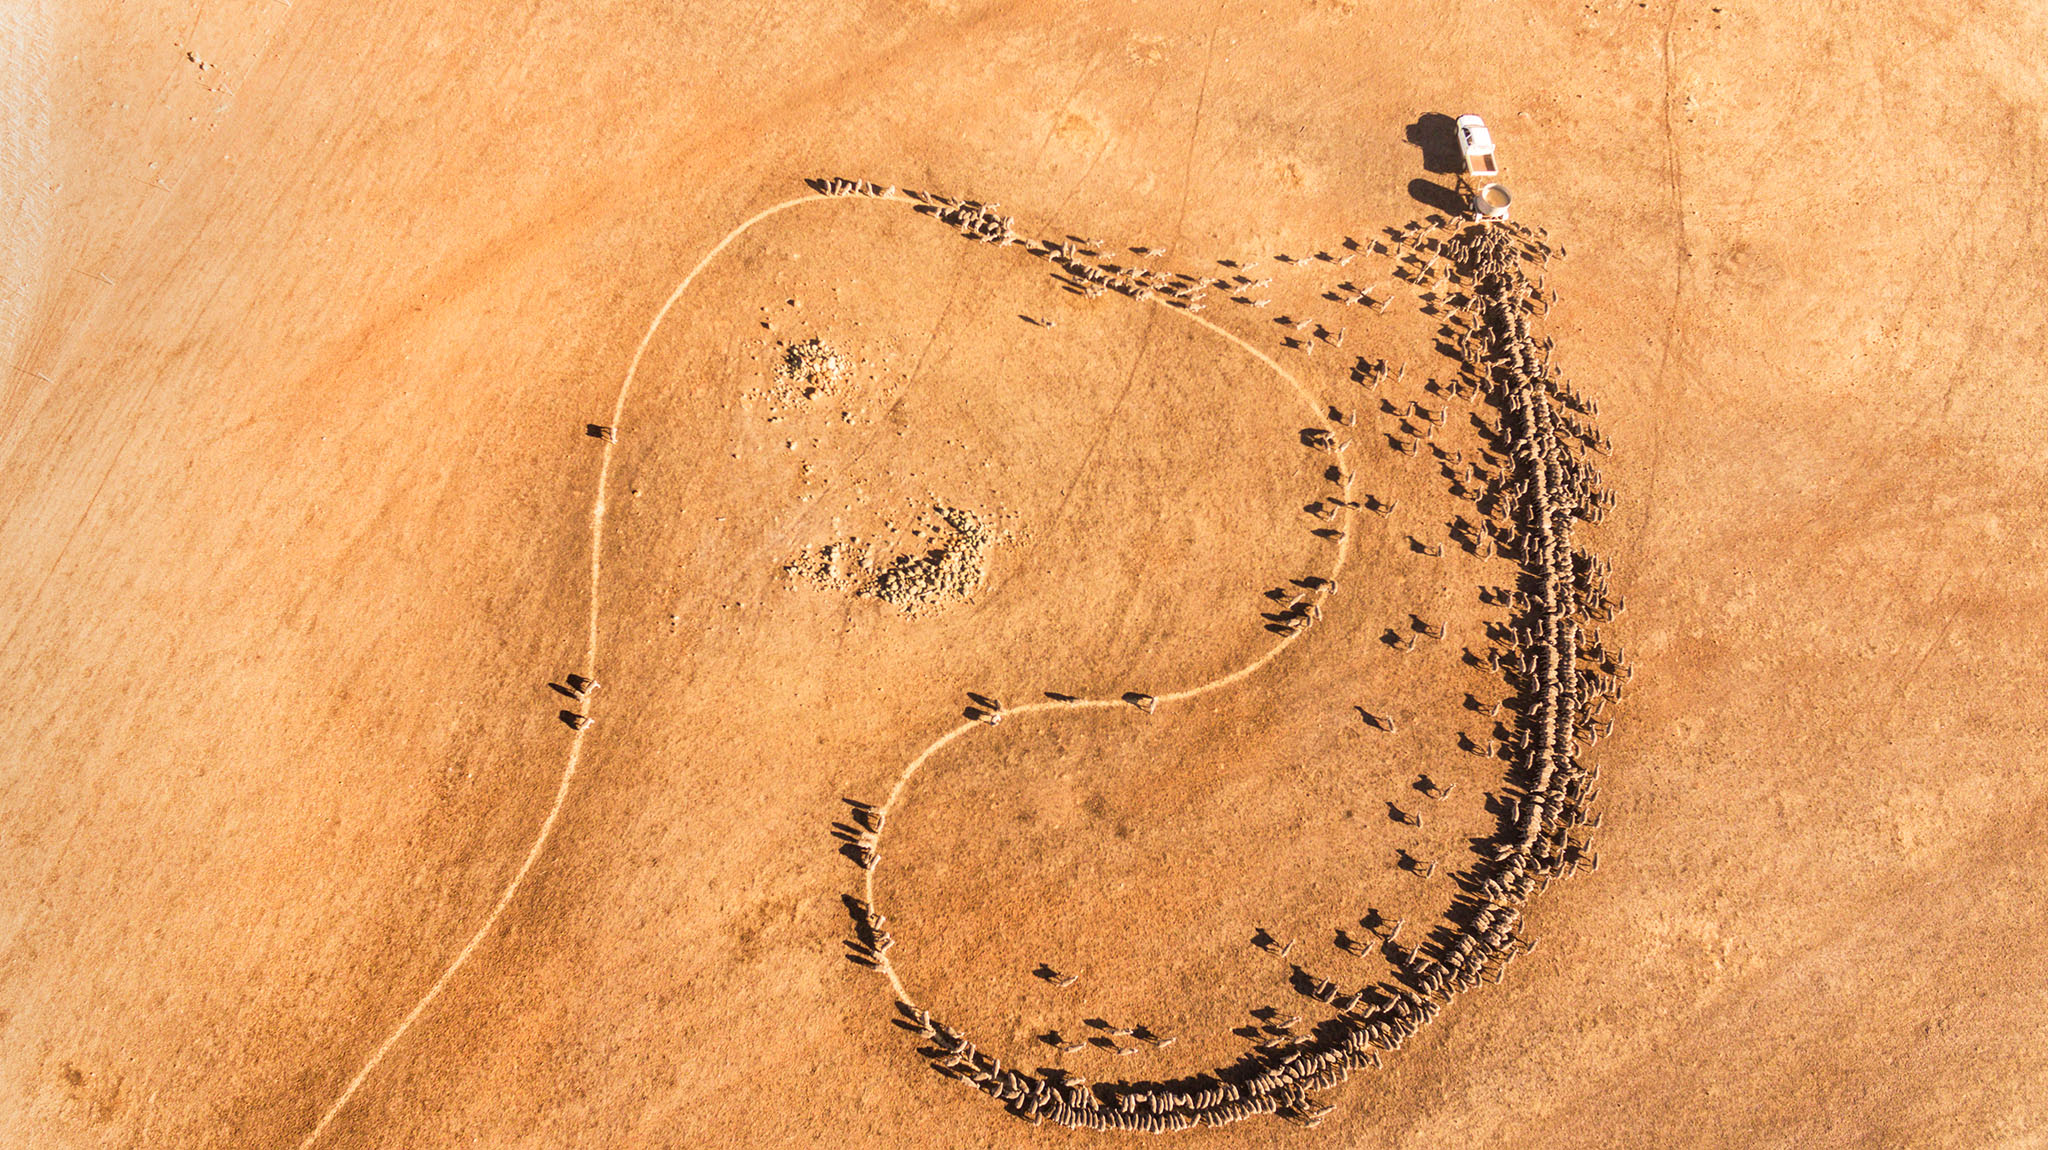 Aerial photo showing the trail of grain fed out to sheep creating a sinuous line through a dry brown landscape